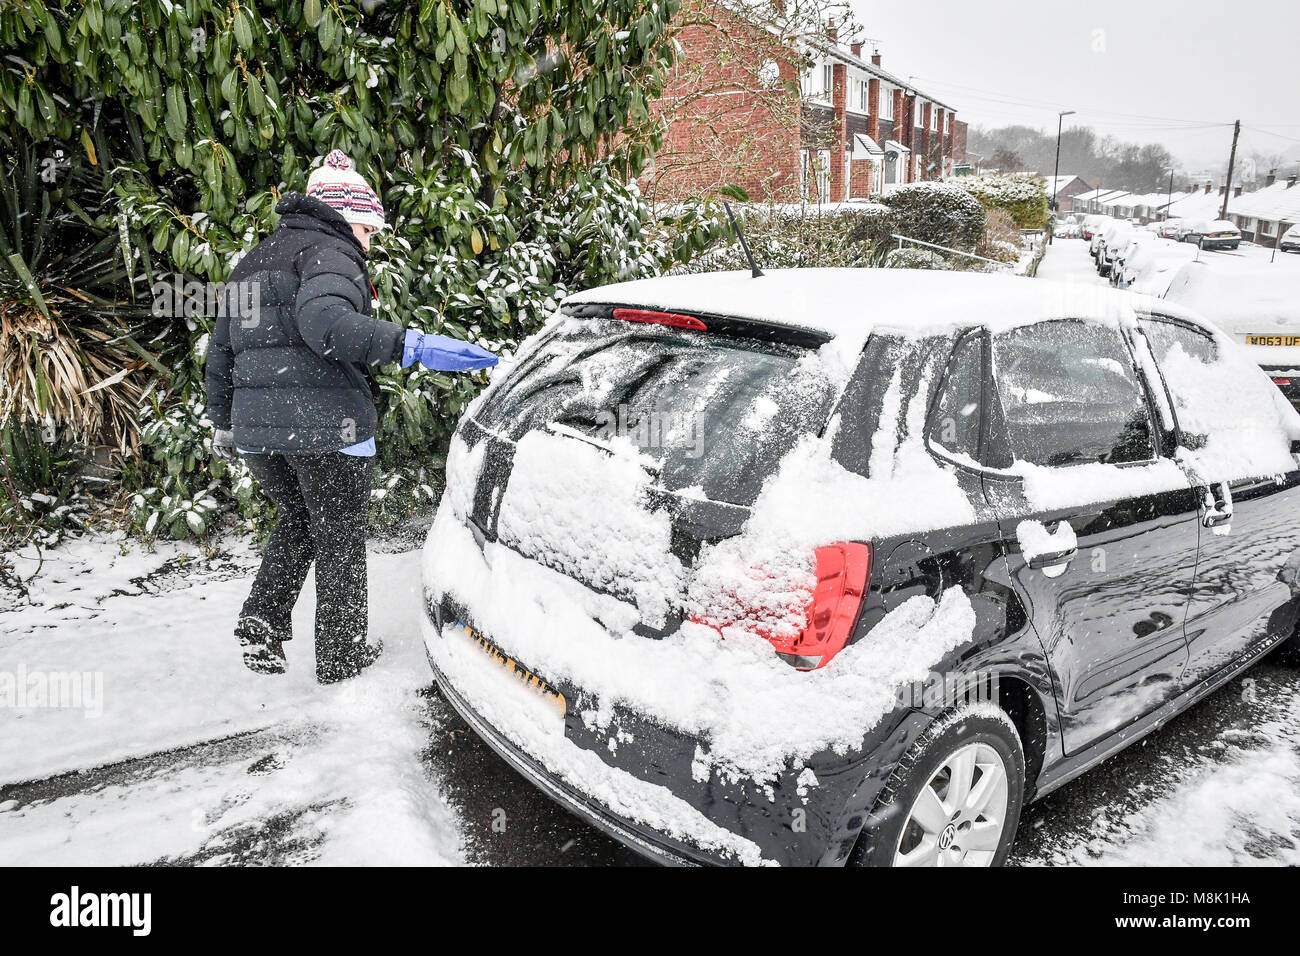 A woman cleans snow off a car in Bristol, where snow fell overnight as the wintry snap dubbed the 'mini beast from the east' keeps its grip on the UK. Stock Photo